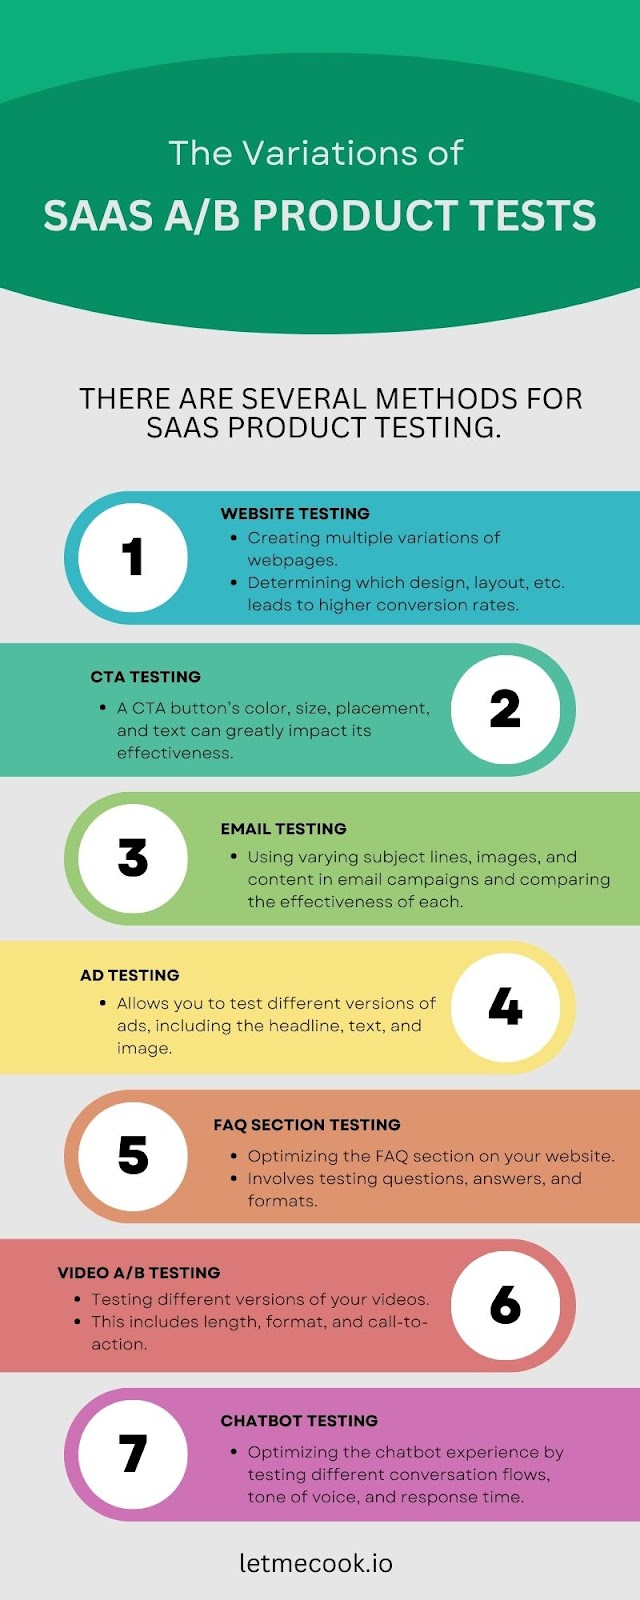 The variations of SaaS A/B product tests explained. Want to learn more? Read this article on A/B testing for SaaS companies.